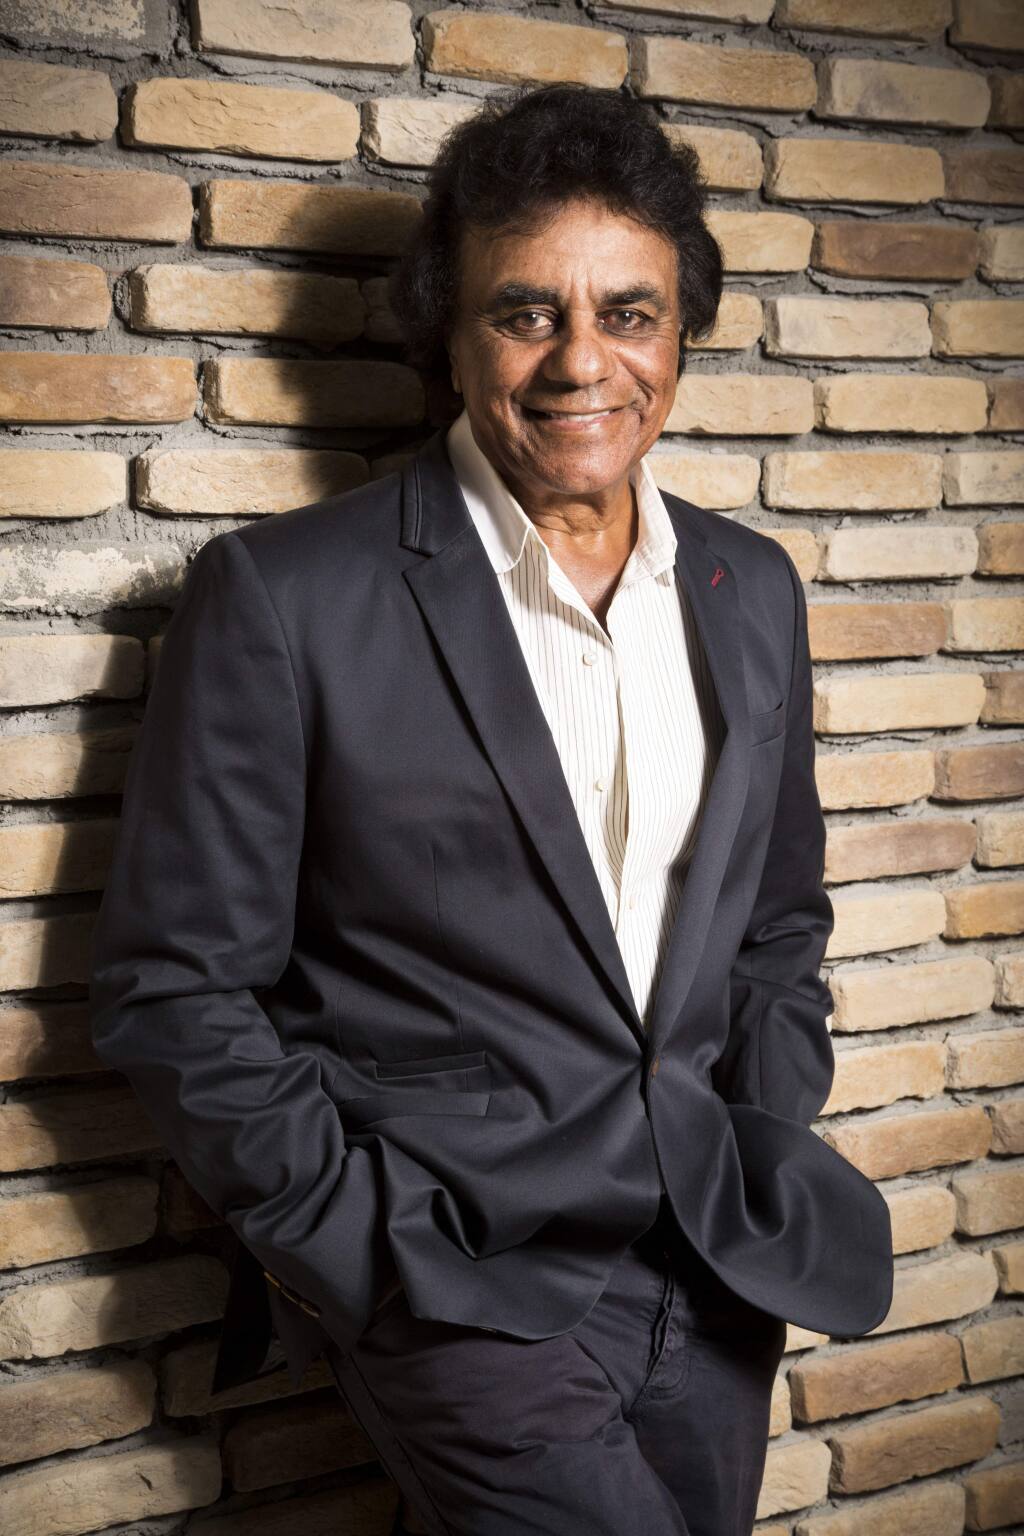 In this Monday, Sept. 8, 2014 photo, singer Johnny Mathis poses for a portrait in Los Angeles. (Photo by Omar Vega/Invision/AP)